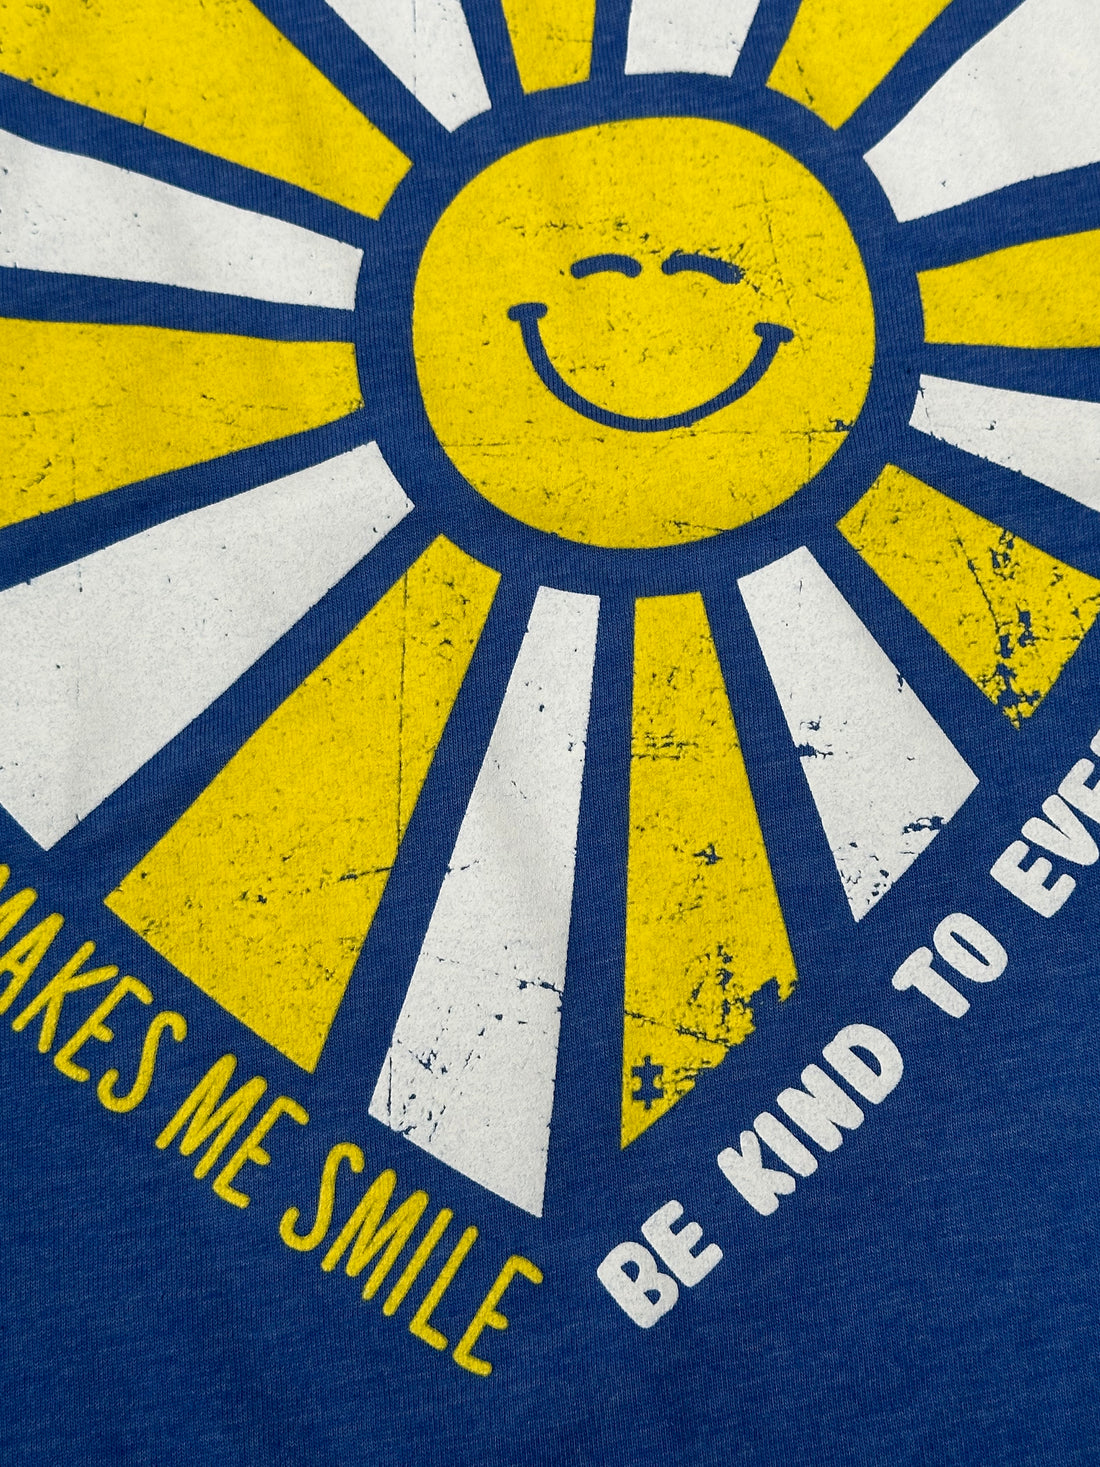 Our Someone with Autism Makes Me Smile Be Kind to Everyone® tee features a puzzle piece in one of the sunbeams.